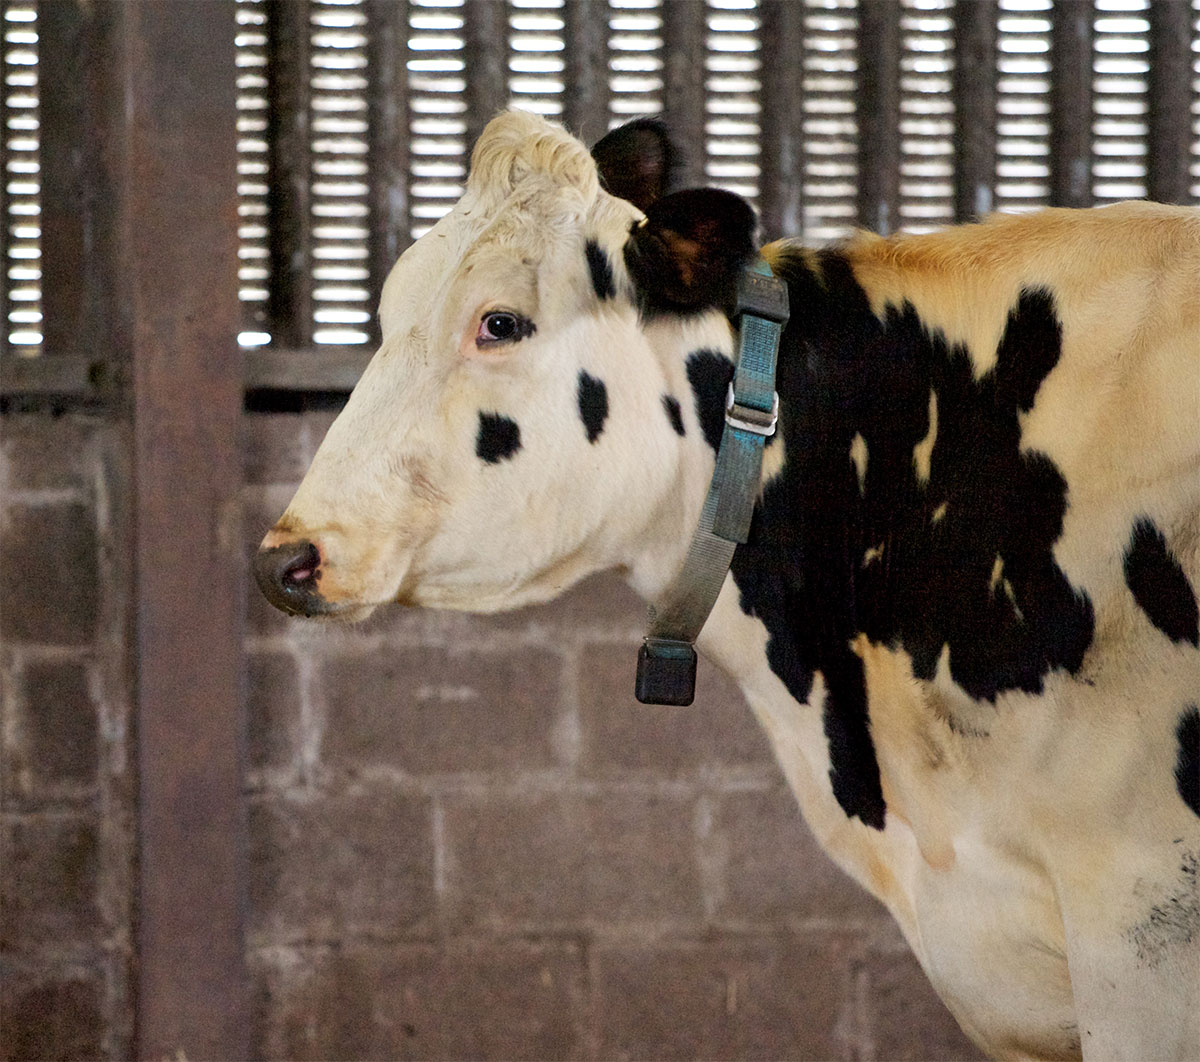 Data gathered from collar-mounted accelerometers can indicate early signs of illness, such as lameness, in individual cows. Image credit - Ivan Andonovic